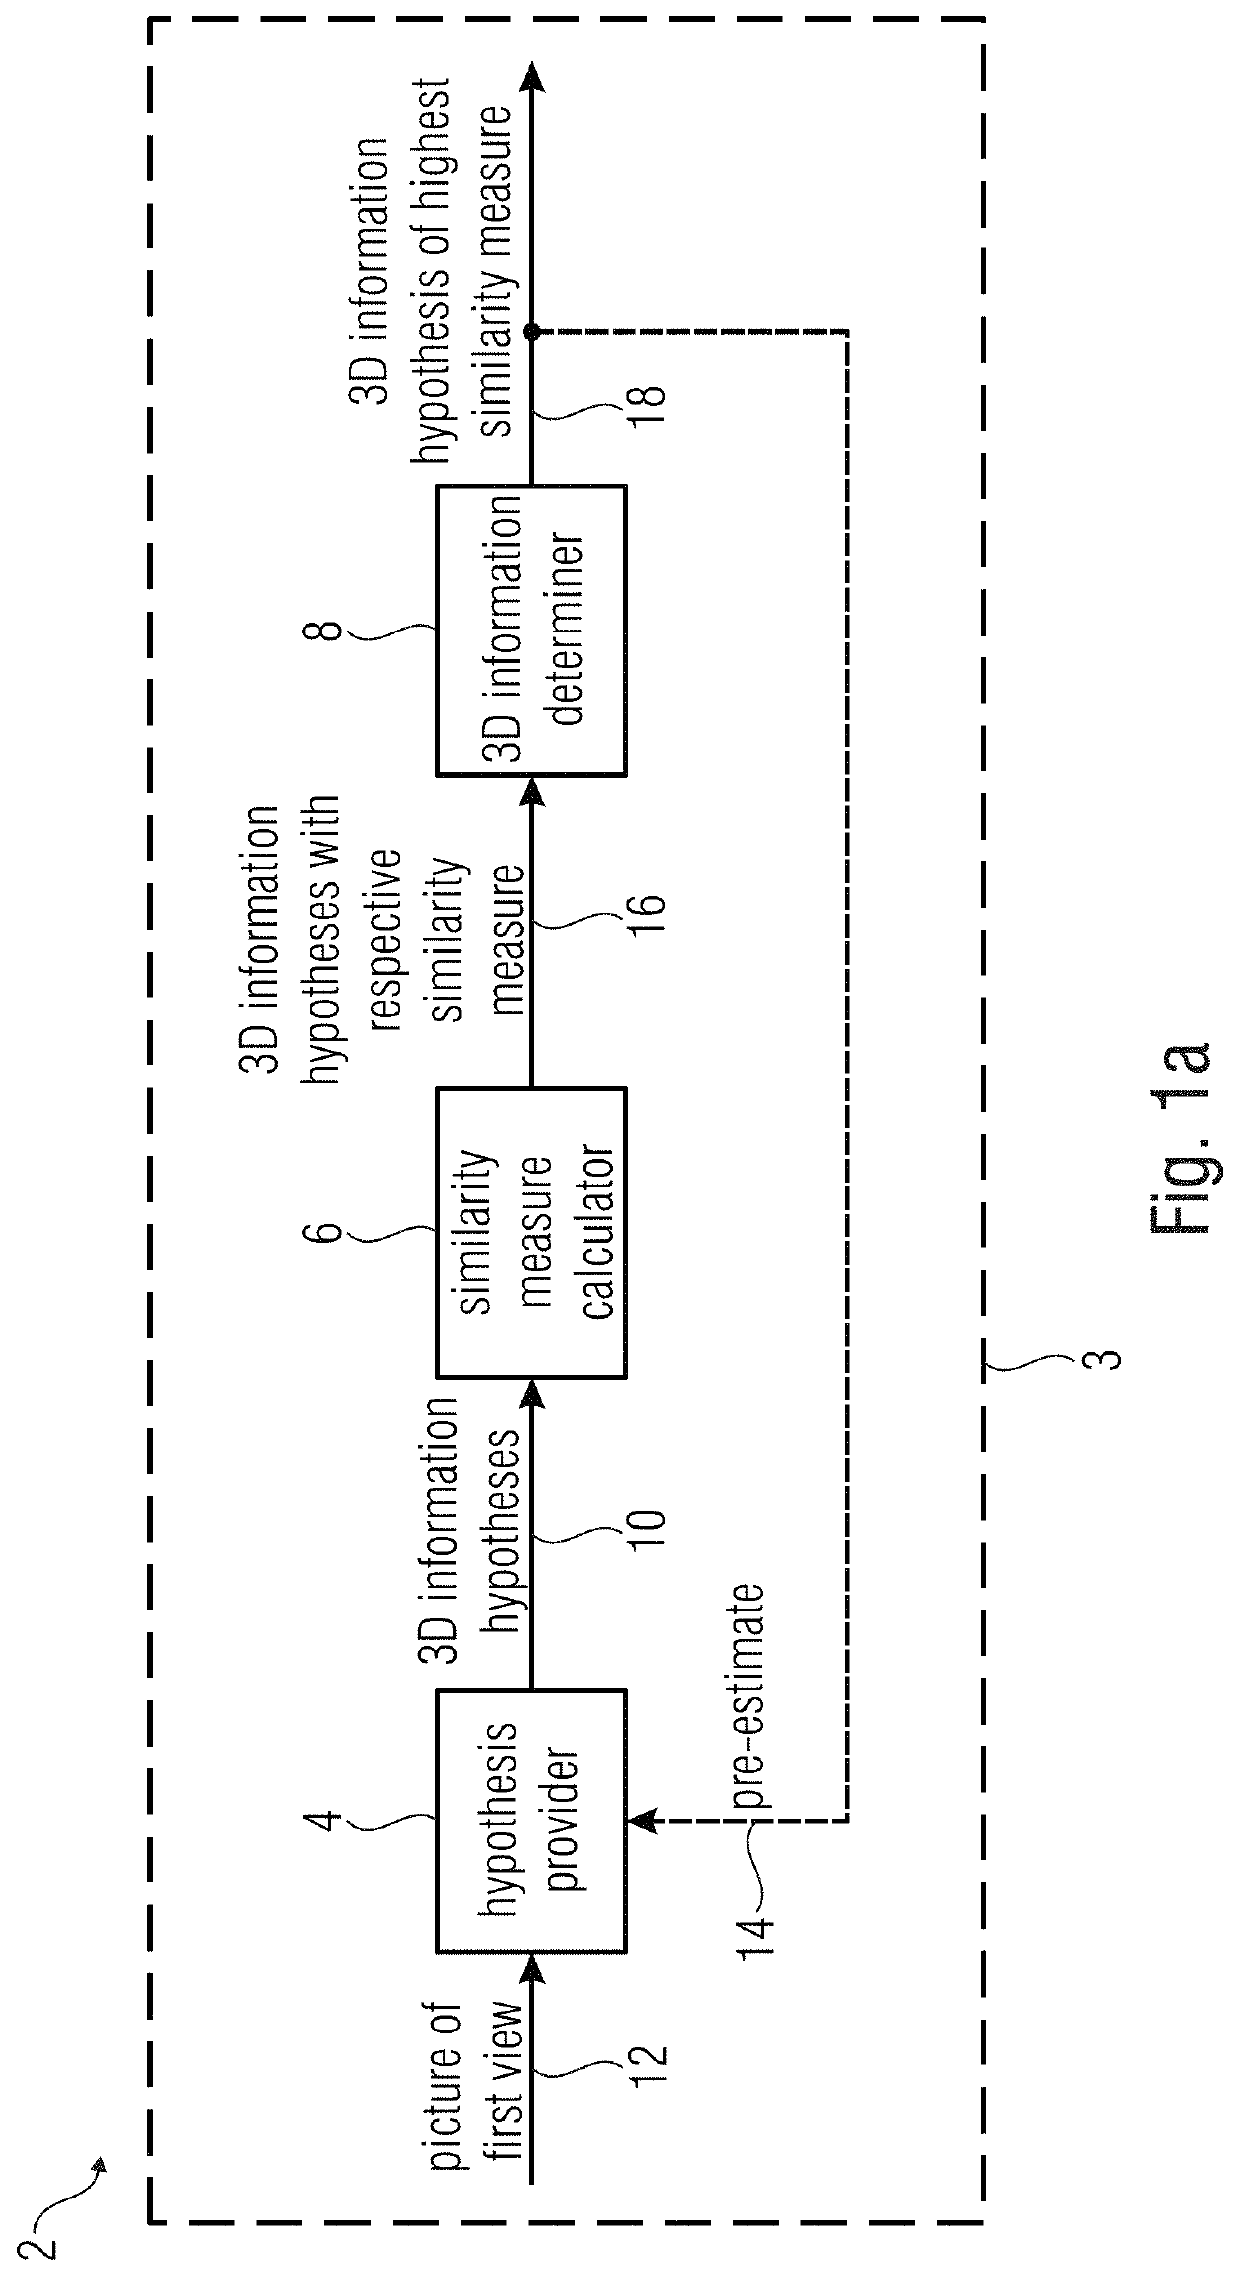 Apparatus and method for performing 3D estimation based on locally determined 3D information hypotheses